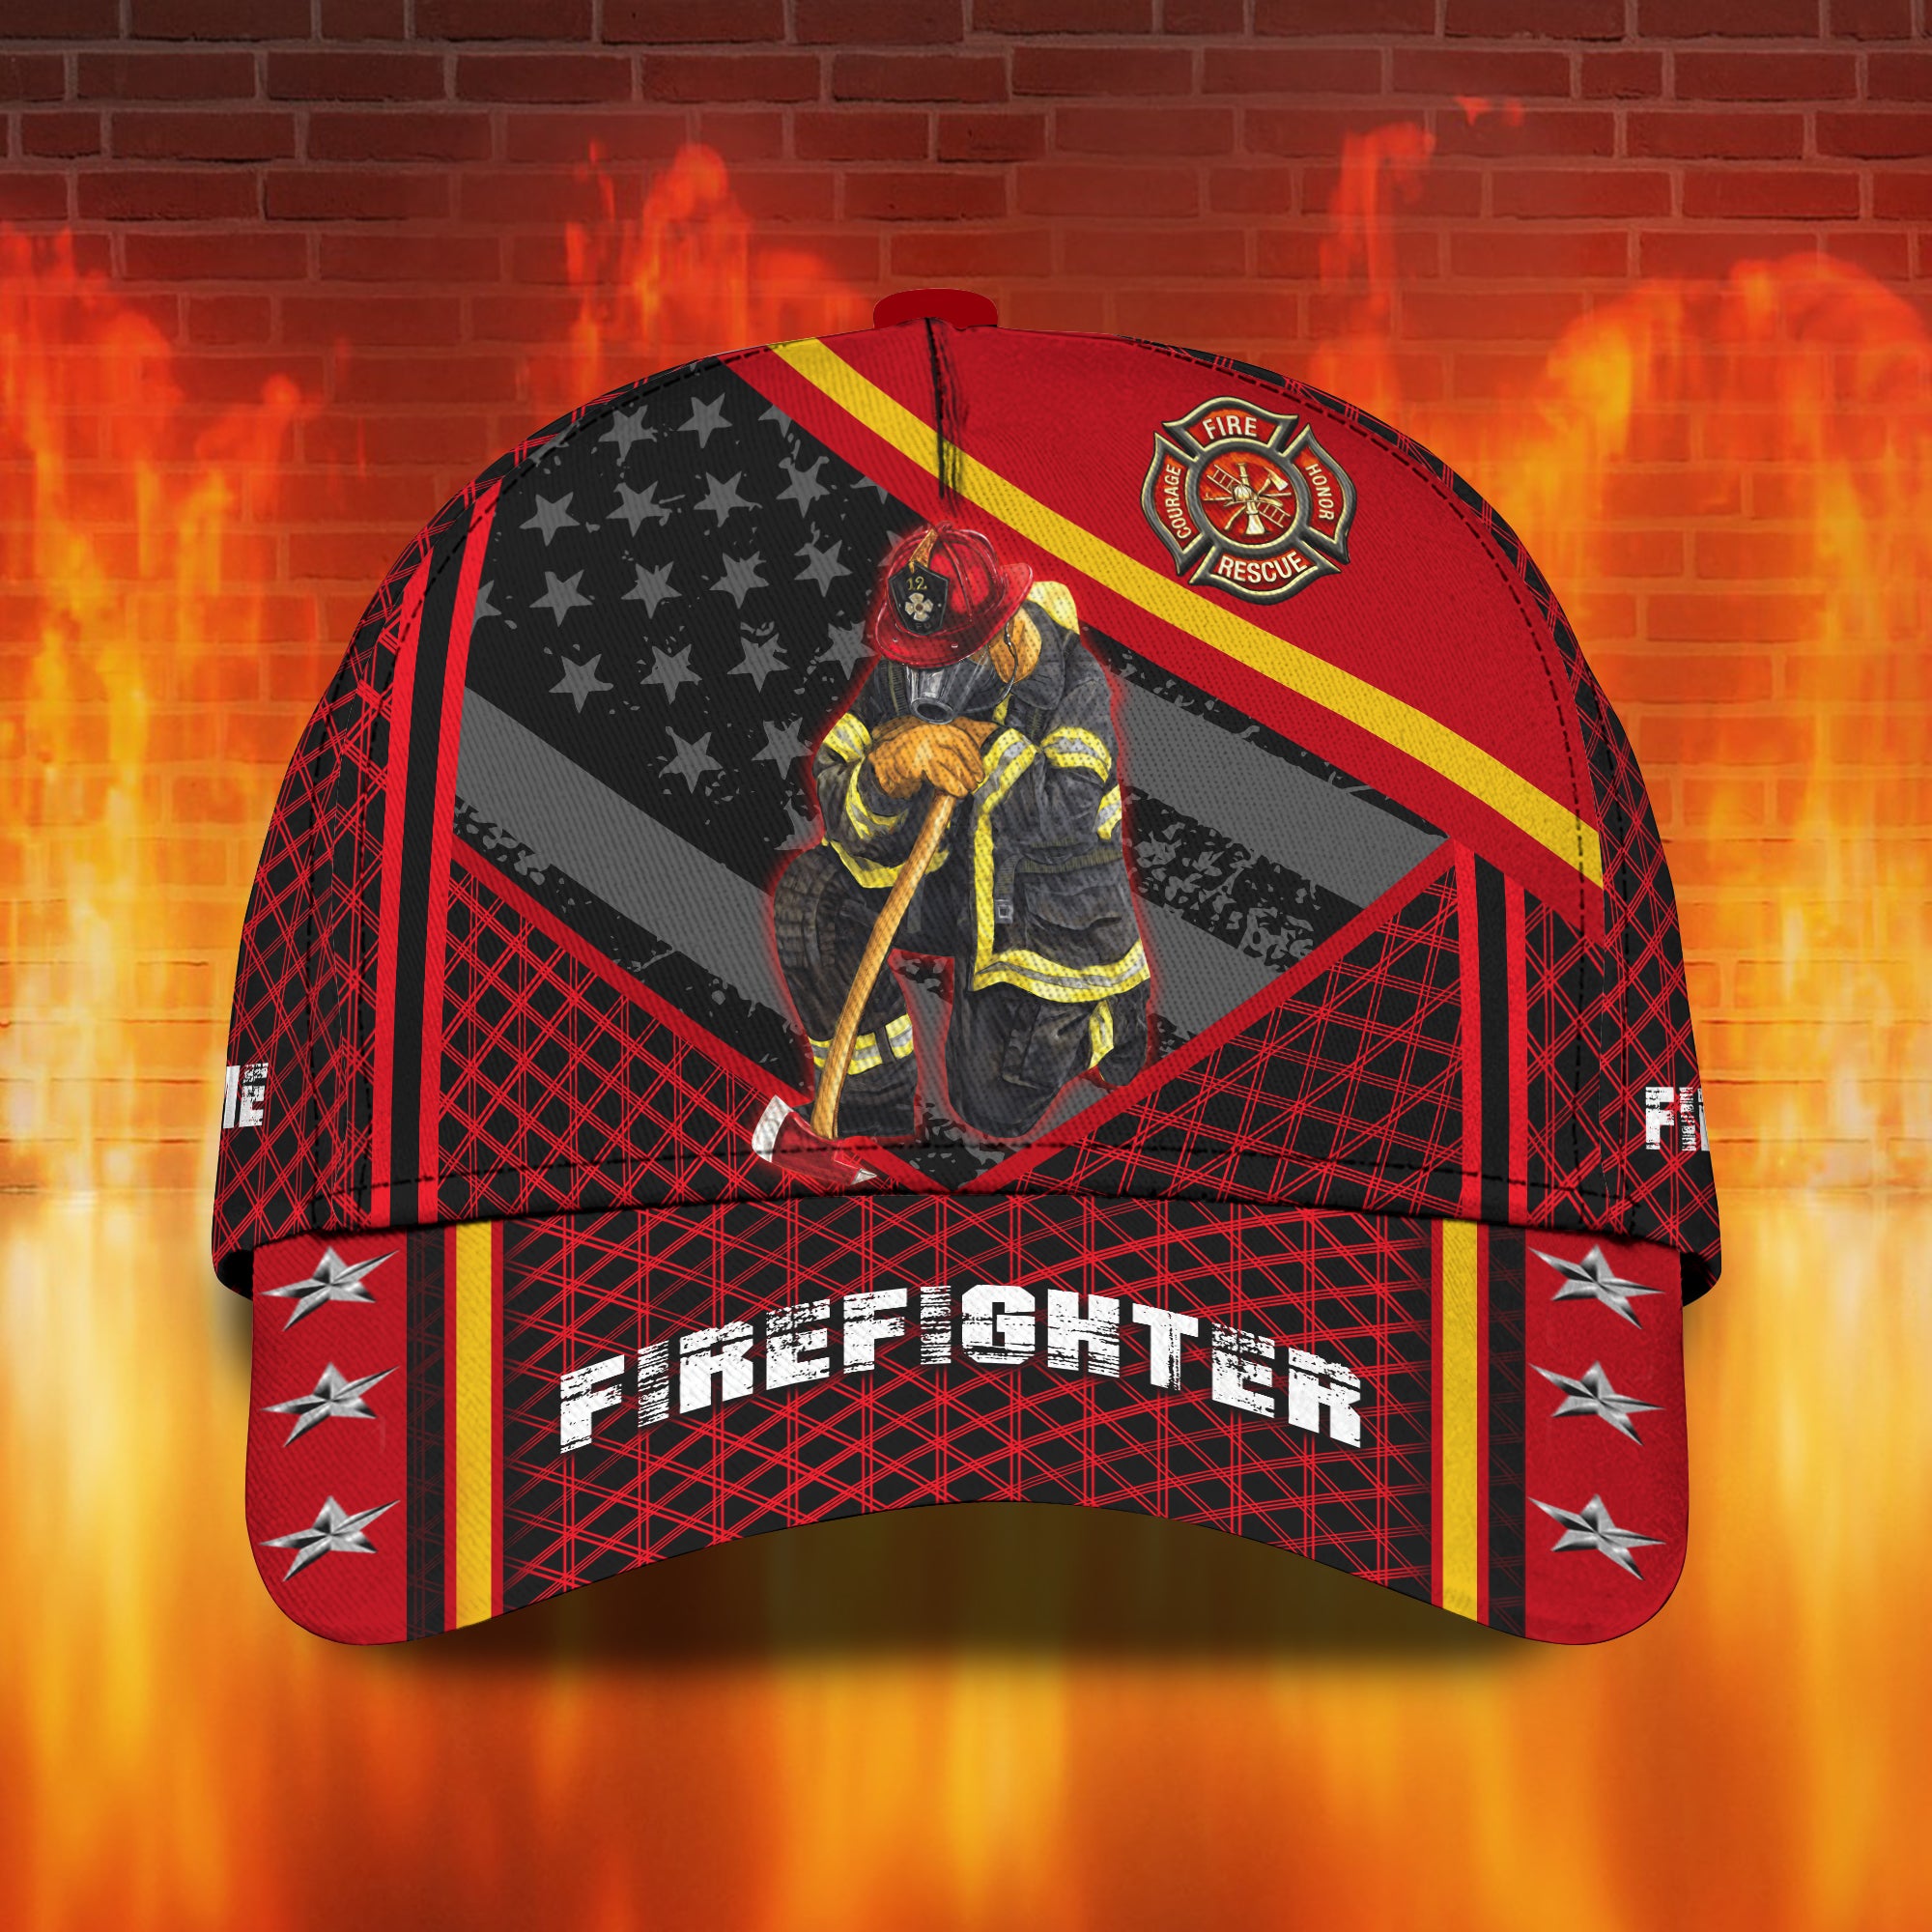 Firefighter - Personalized Name Cap 02 - CV98